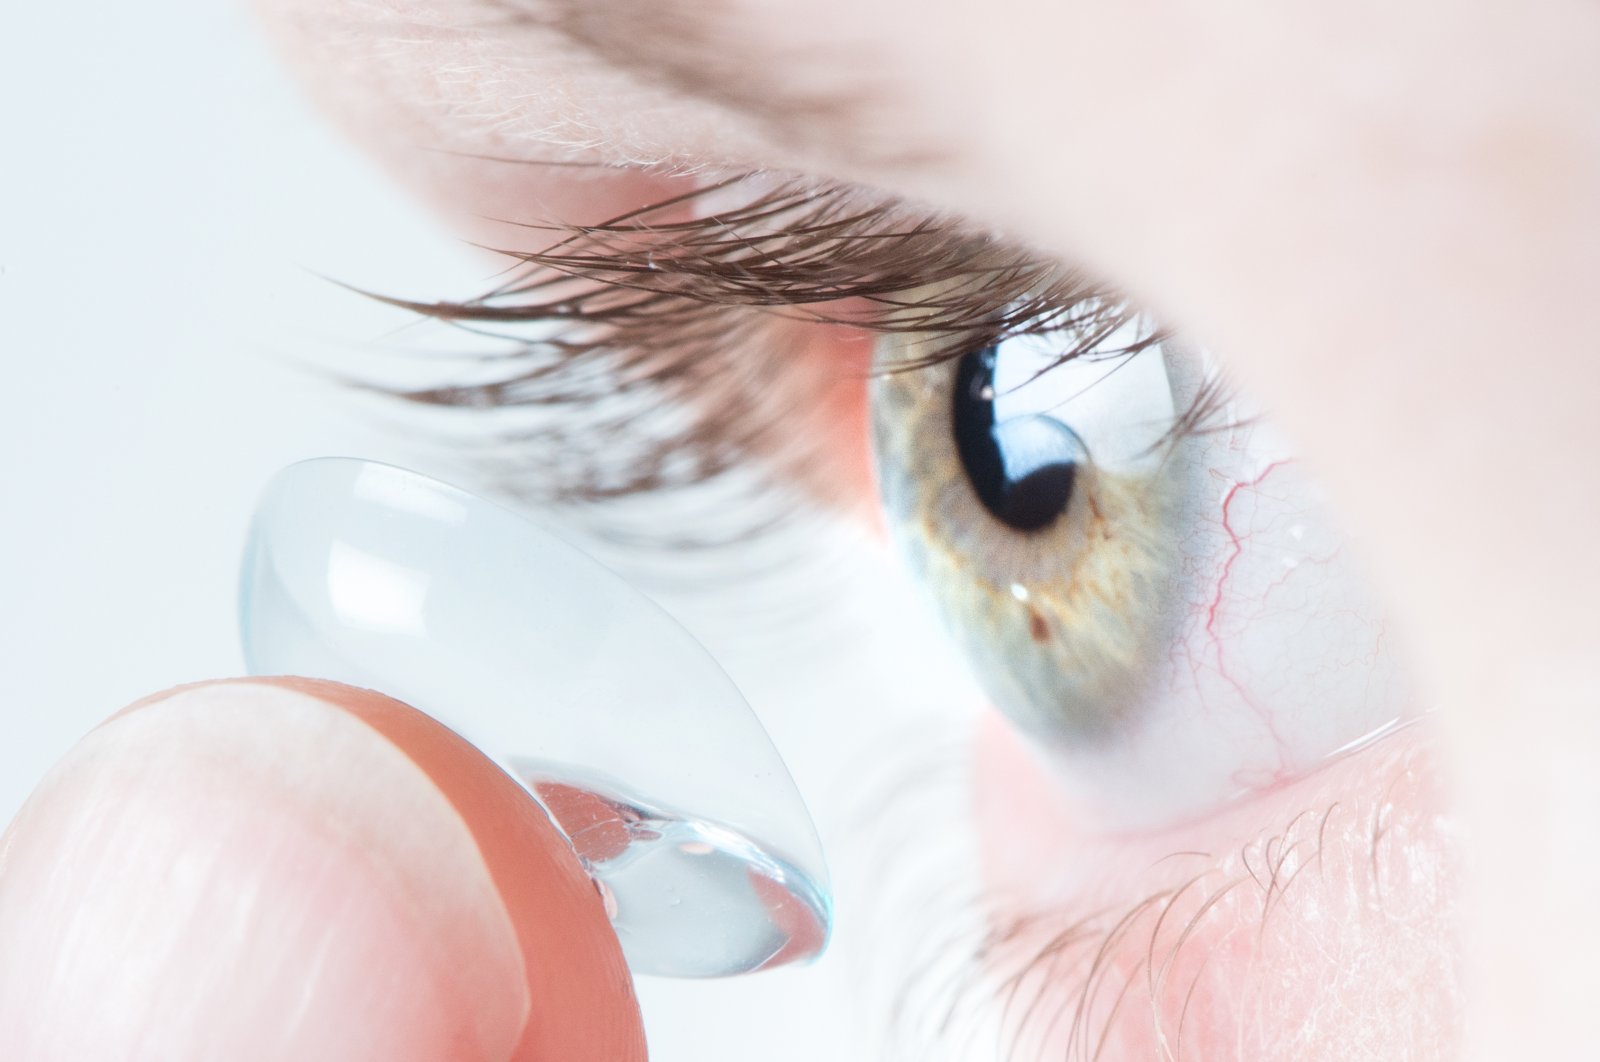 Anyone who wears reusable contact lenses should avoid wearing them while swimming, or in the shower, according to new research. (dpa Photo)